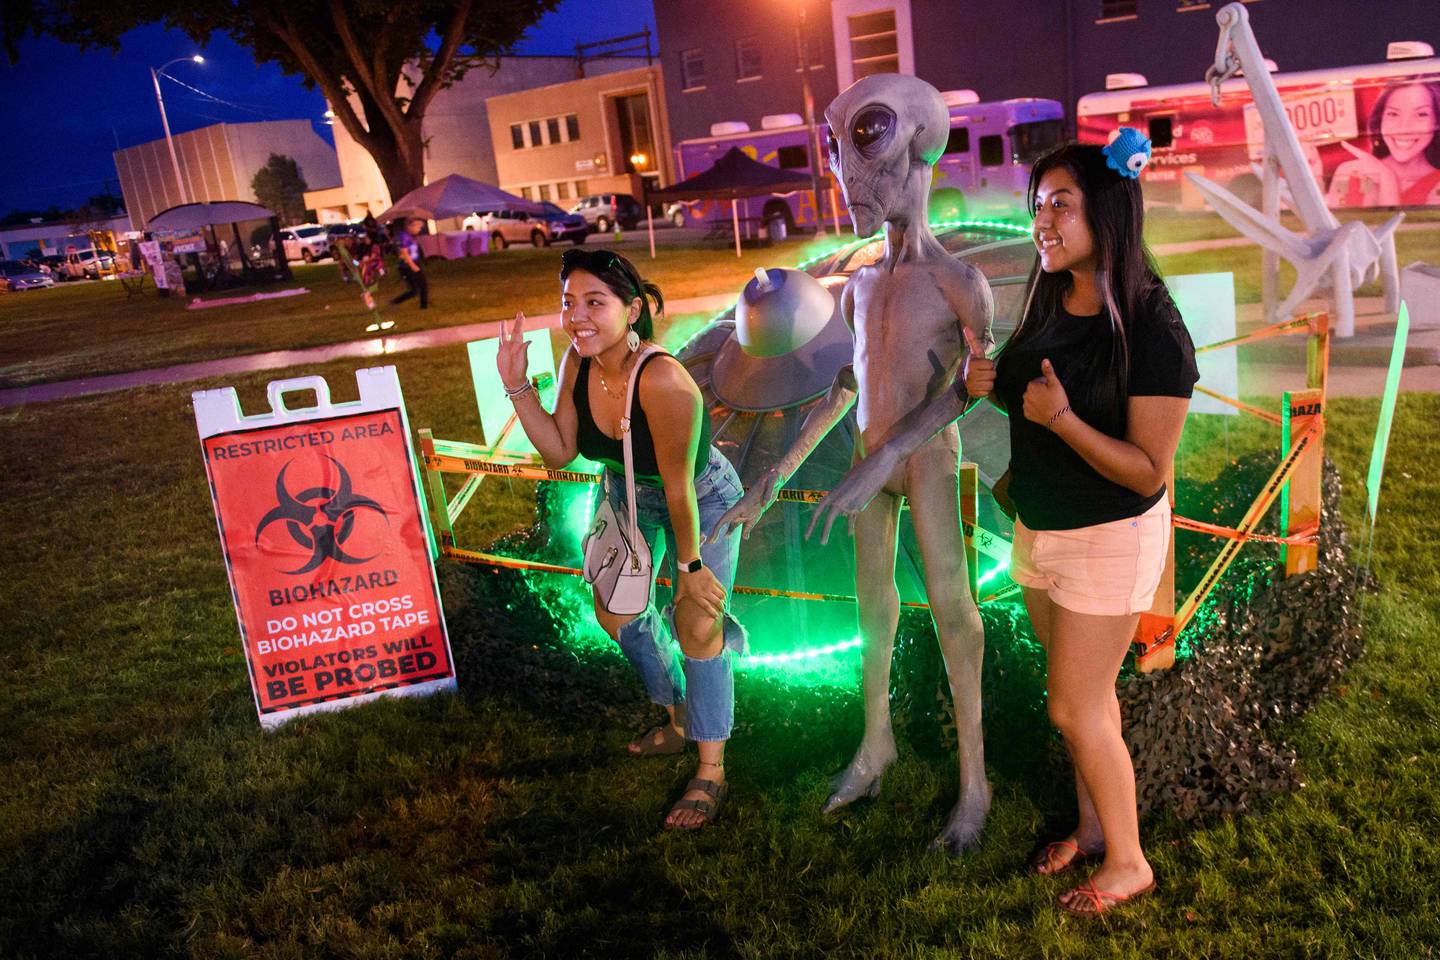 Alien fans pose for pictures during the UFO Festival in Roswell, New Mexico. AFP